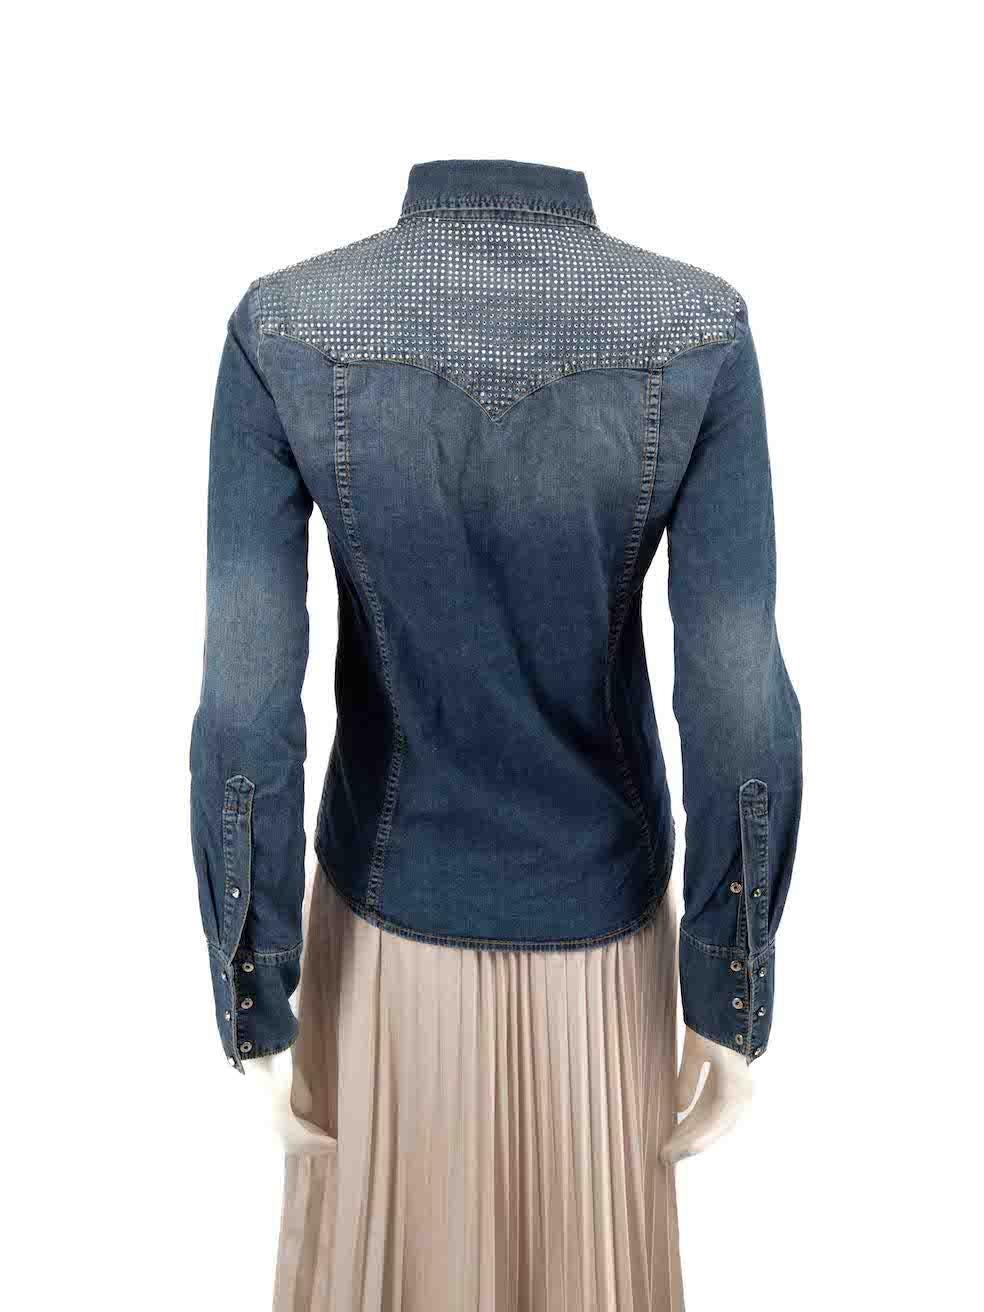 Philipp Plein Blue Denim Embellished Shirt Size M In Excellent Condition For Sale In London, GB